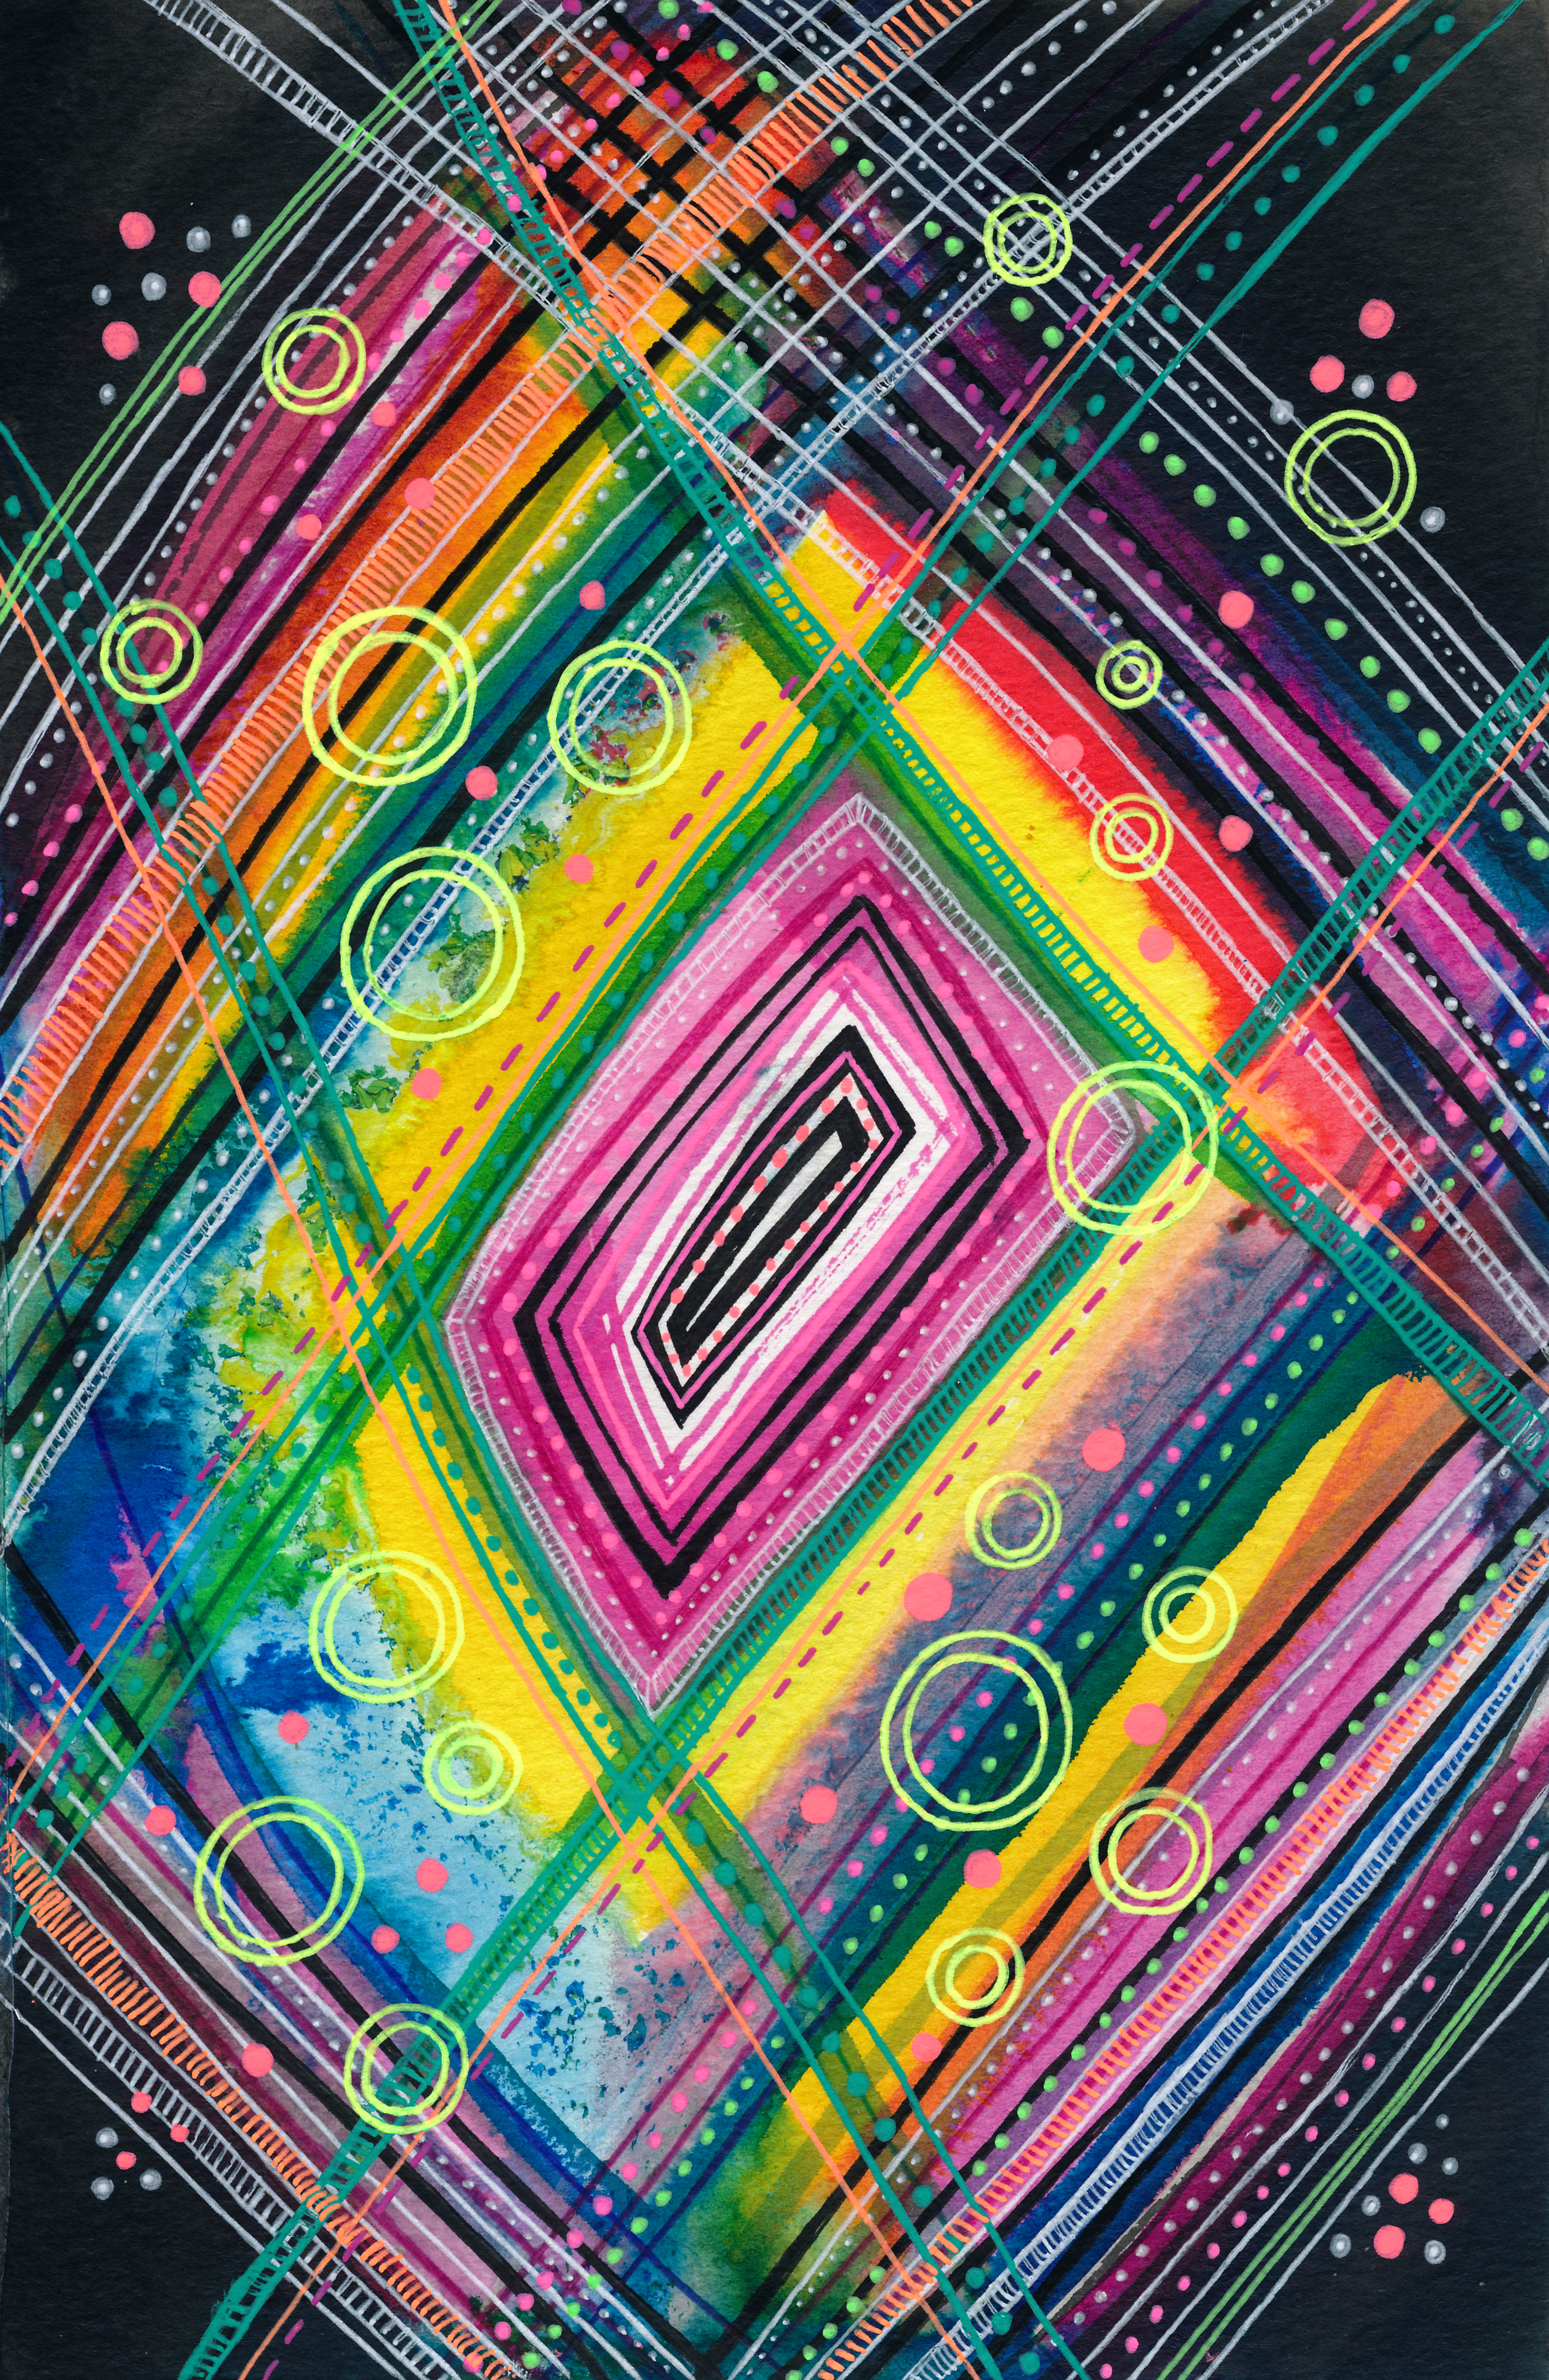 paints, multicolored, abstract, patterns, circles, motley, lines, watercolor Full HD